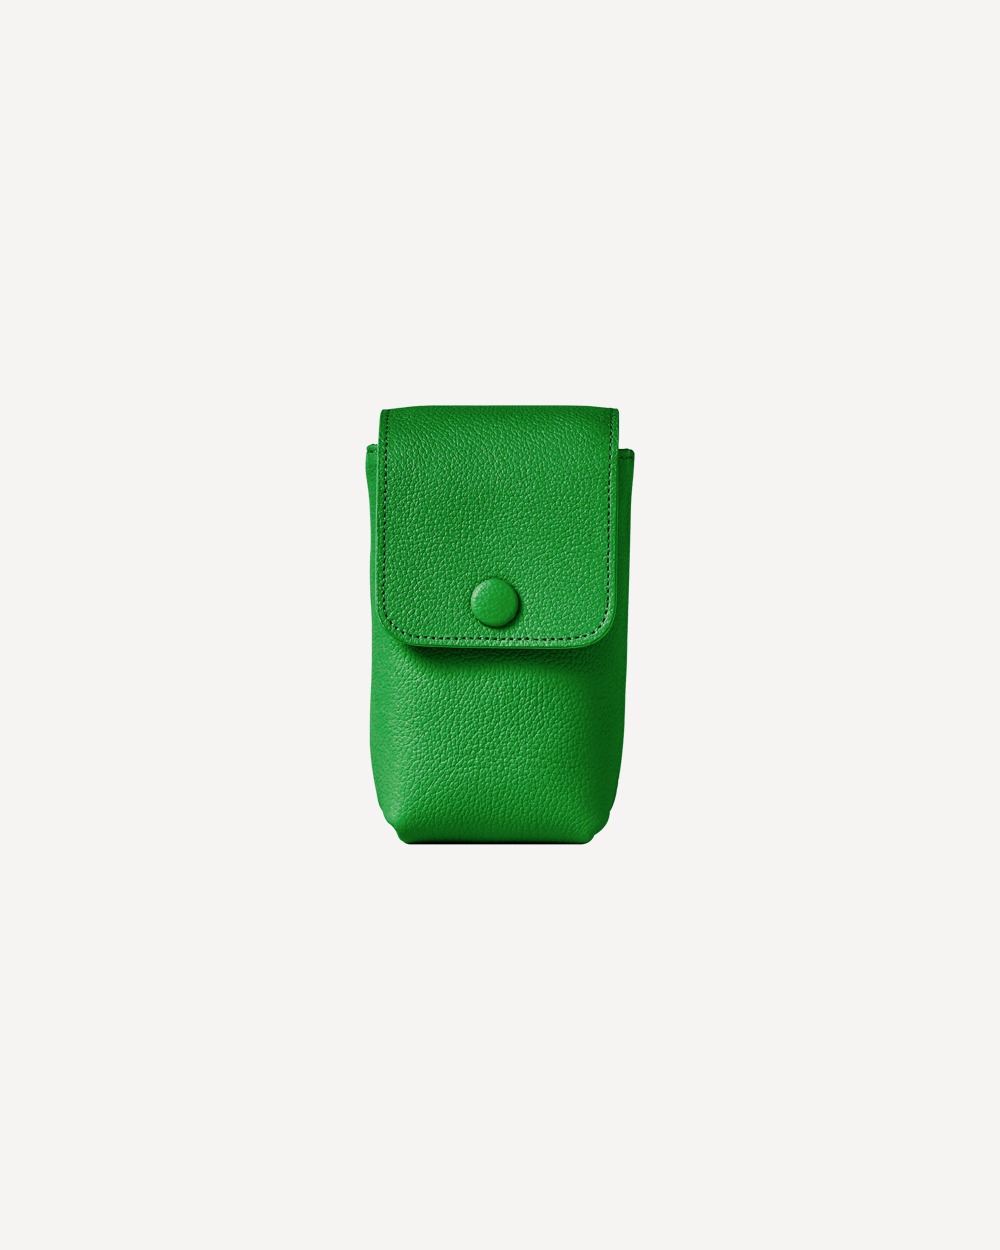 Proper Camera Pouch for RICOH GR3 Series / Green pea